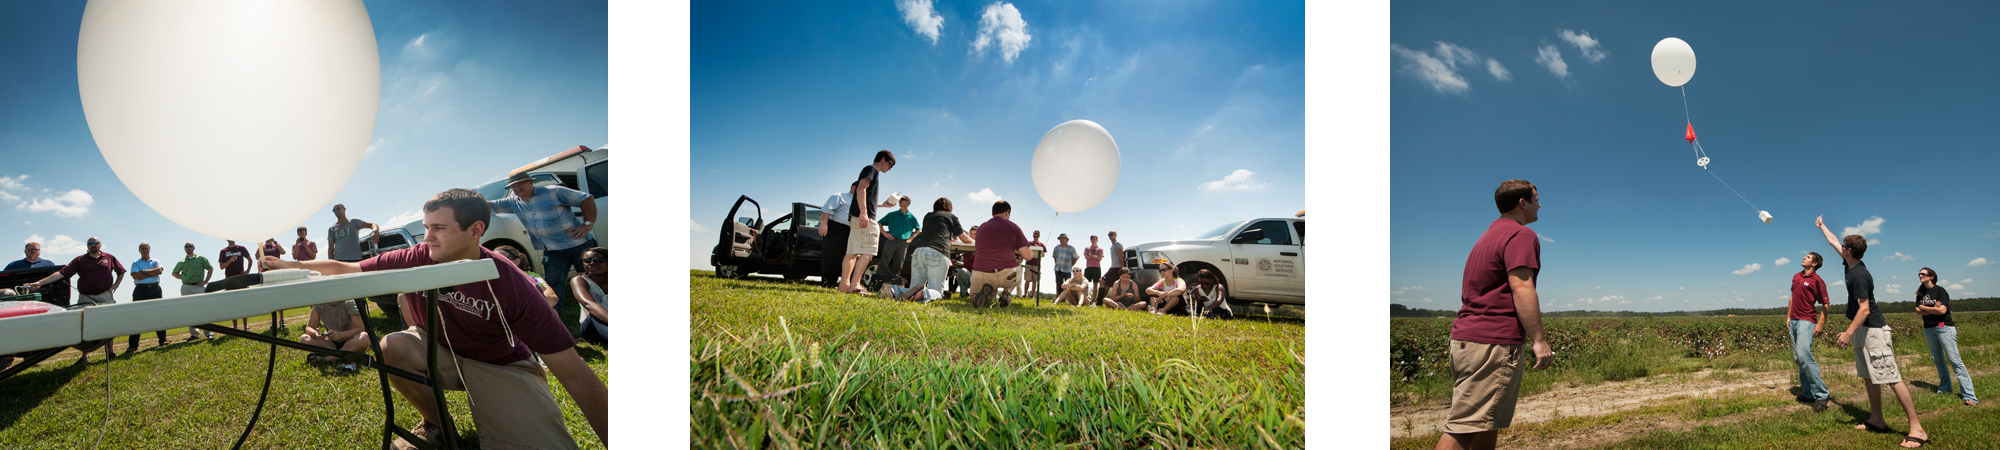 Meteorology students launching a weather balloon (photos by Megan Bean)